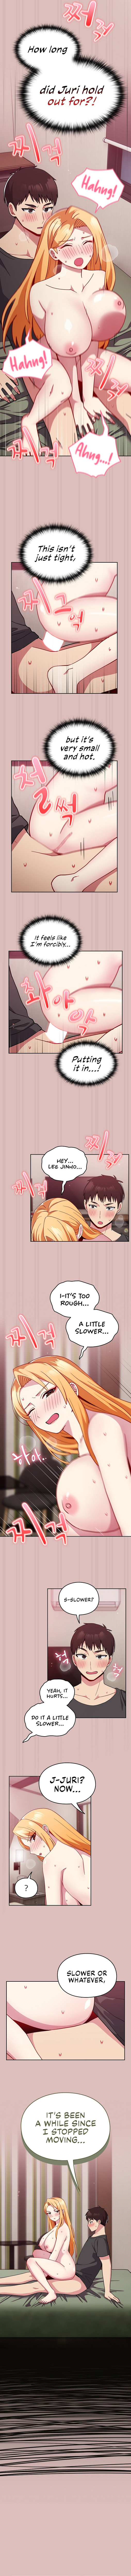 when-did-we-start-dating-chap-36-1